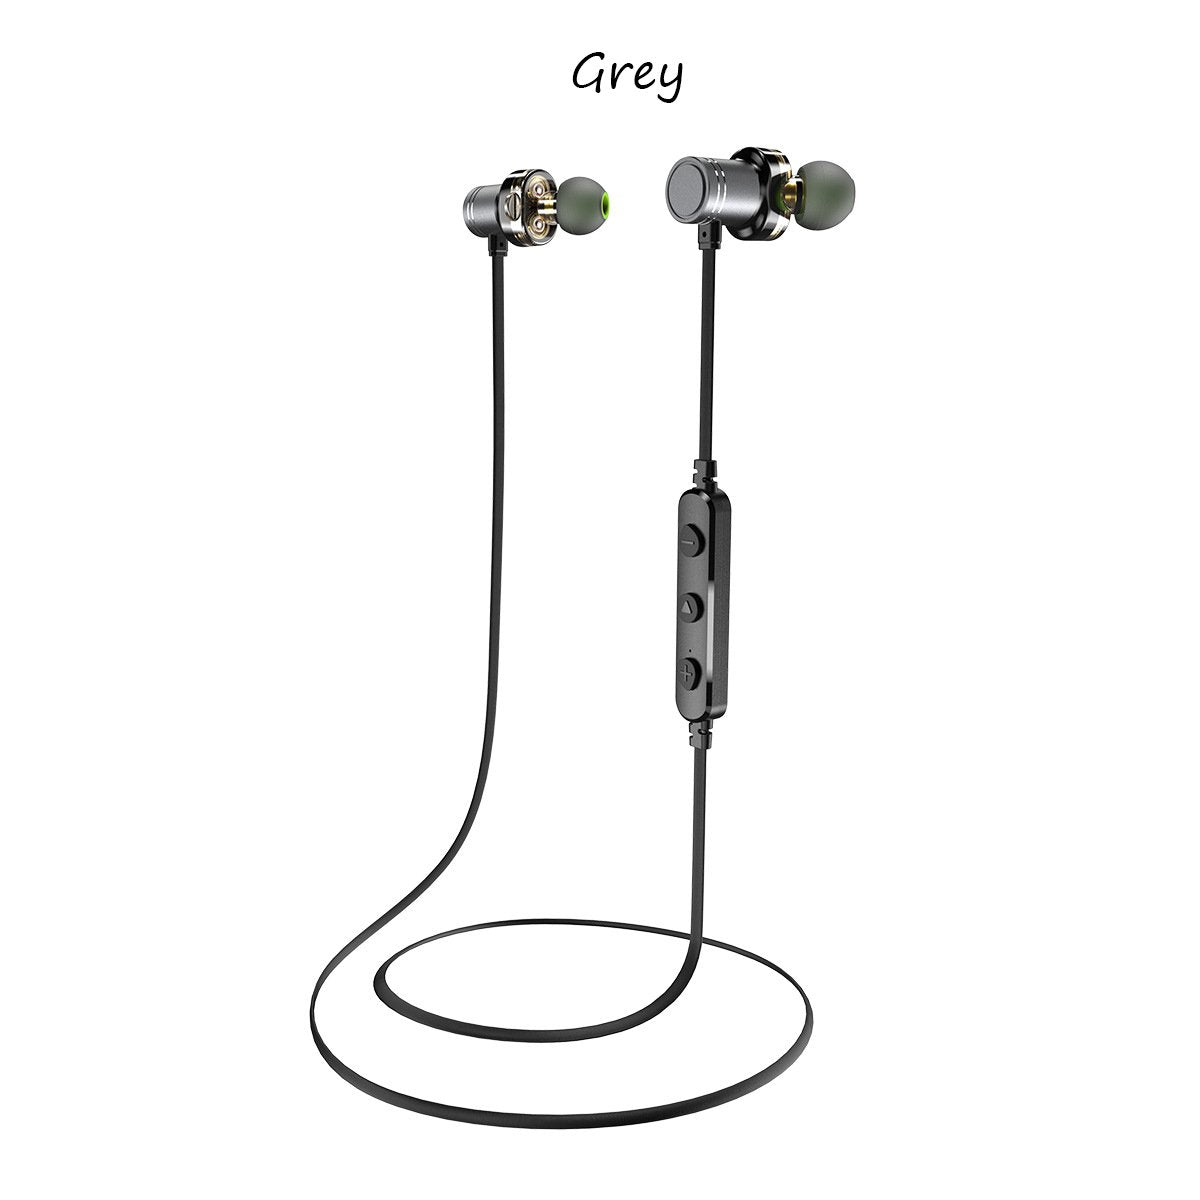 Dual-driver 4-Cavity Magnetic Bluetooth Earphones That Don't Let A Little Bit of The World in